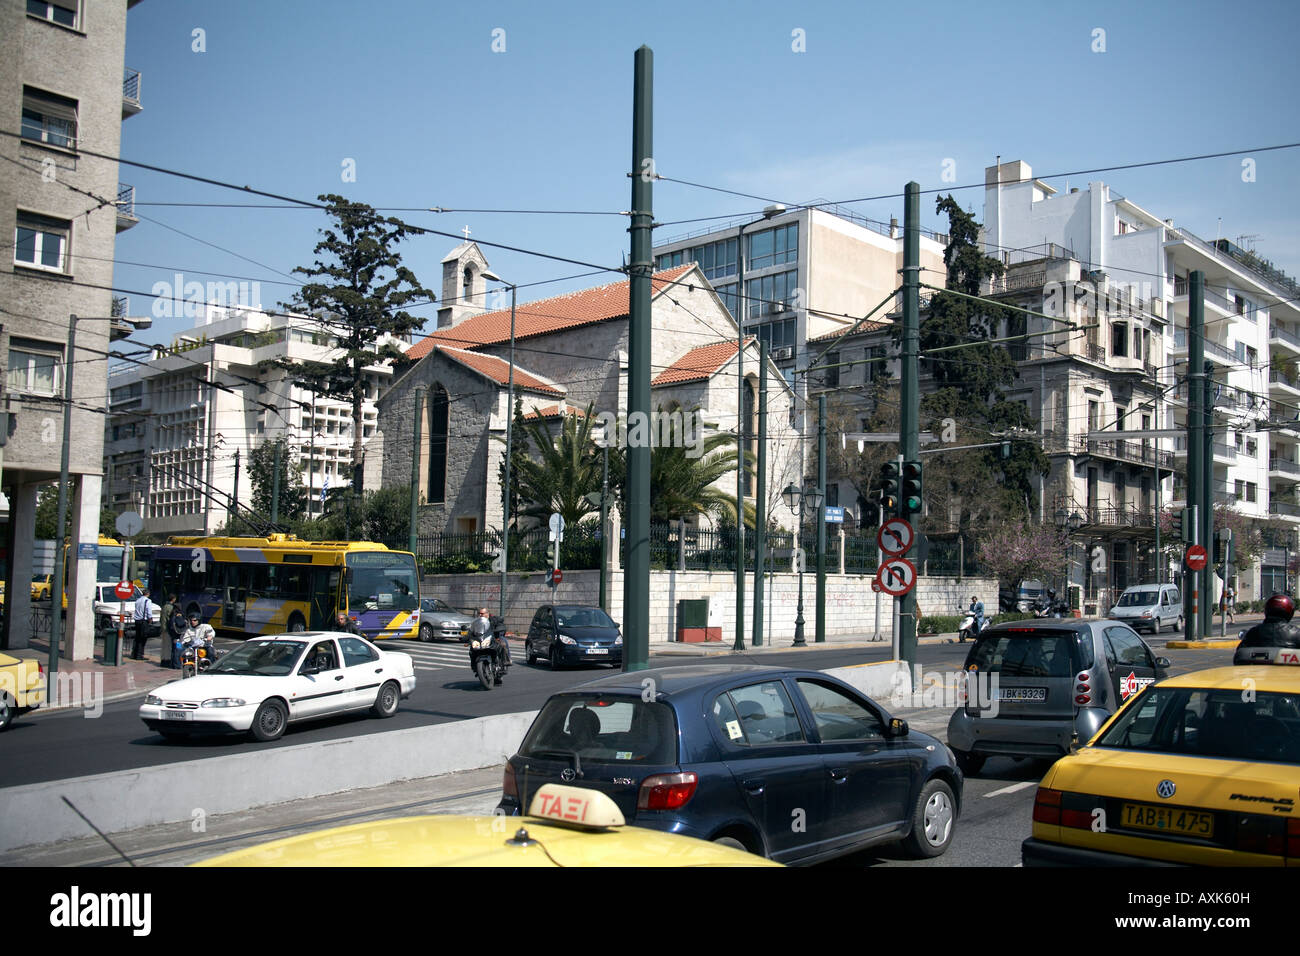 Church and buildings obscured by tram cables with traffic on Andrea Singrou street in Athens or Athini Greece Stock Photo